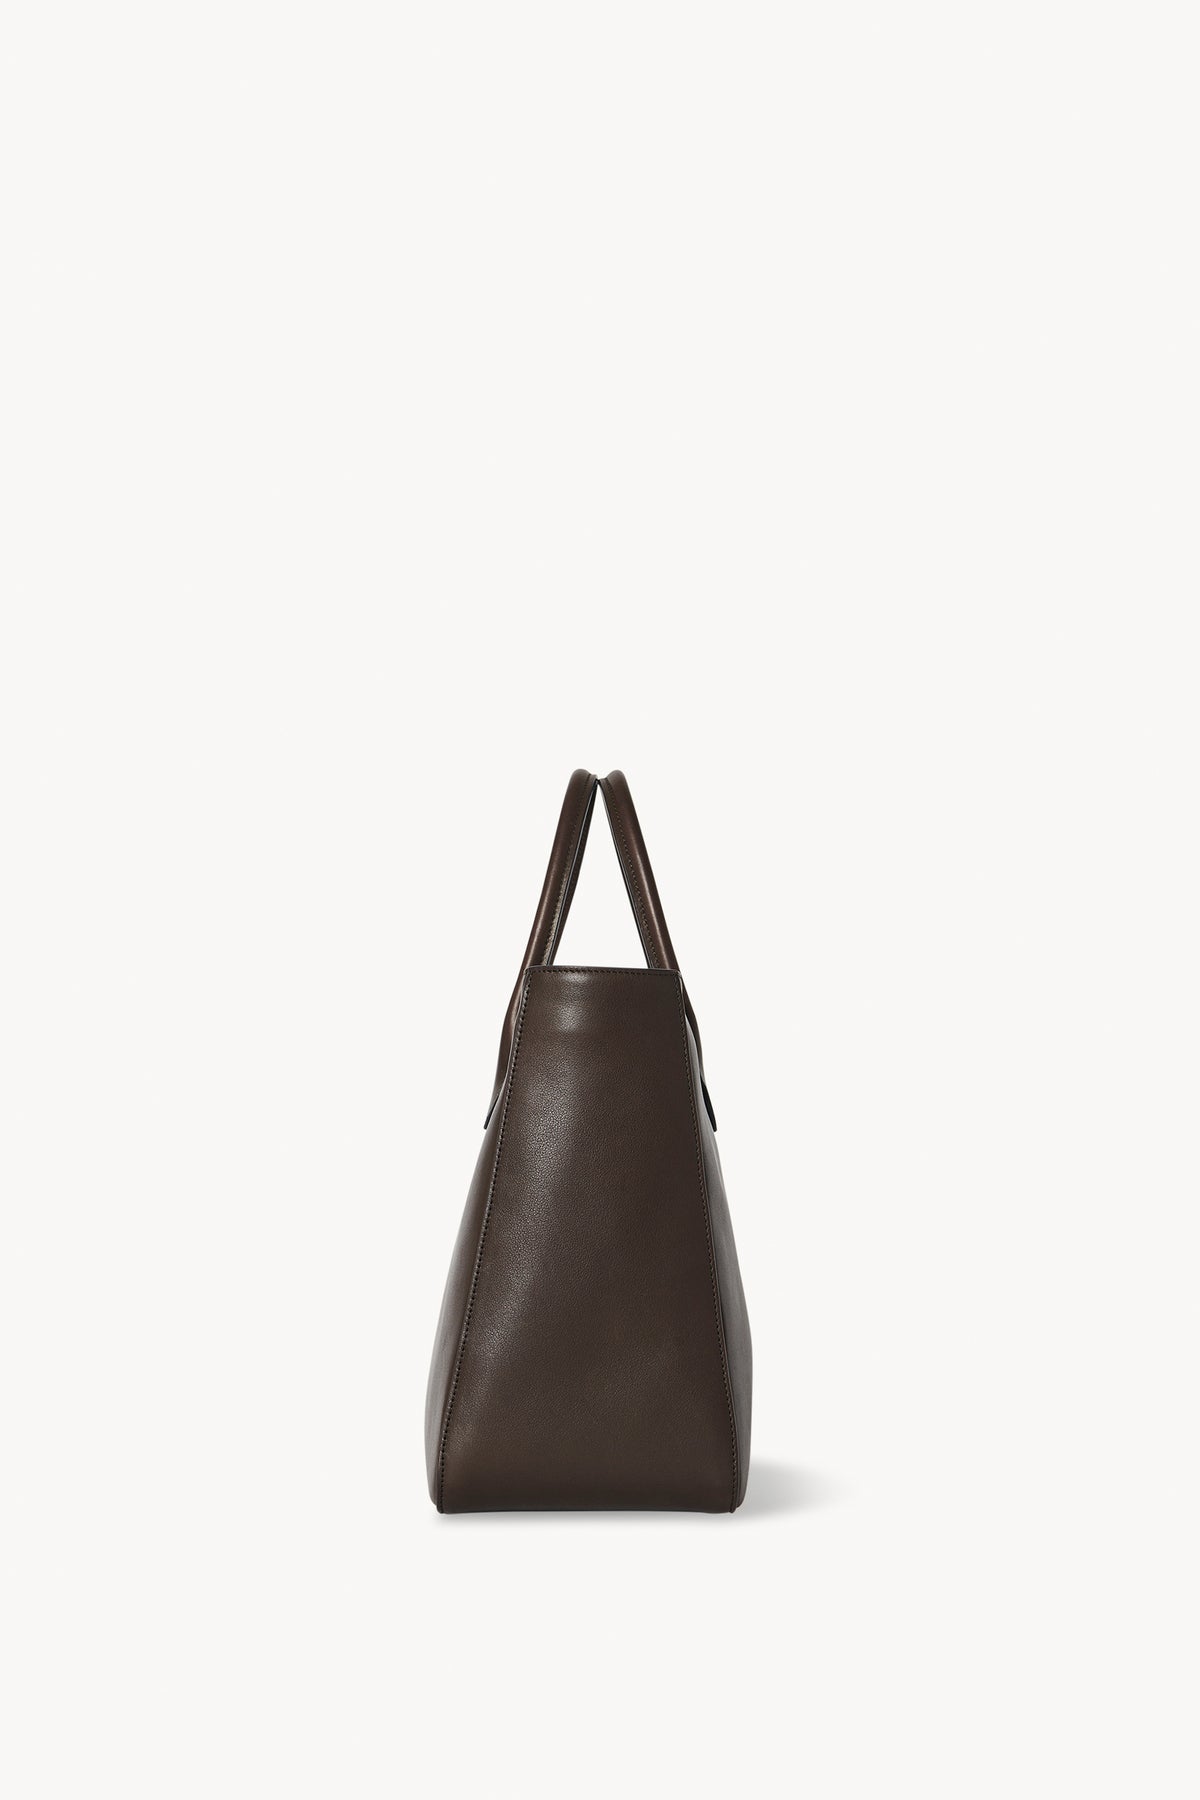 the row day luxe tote